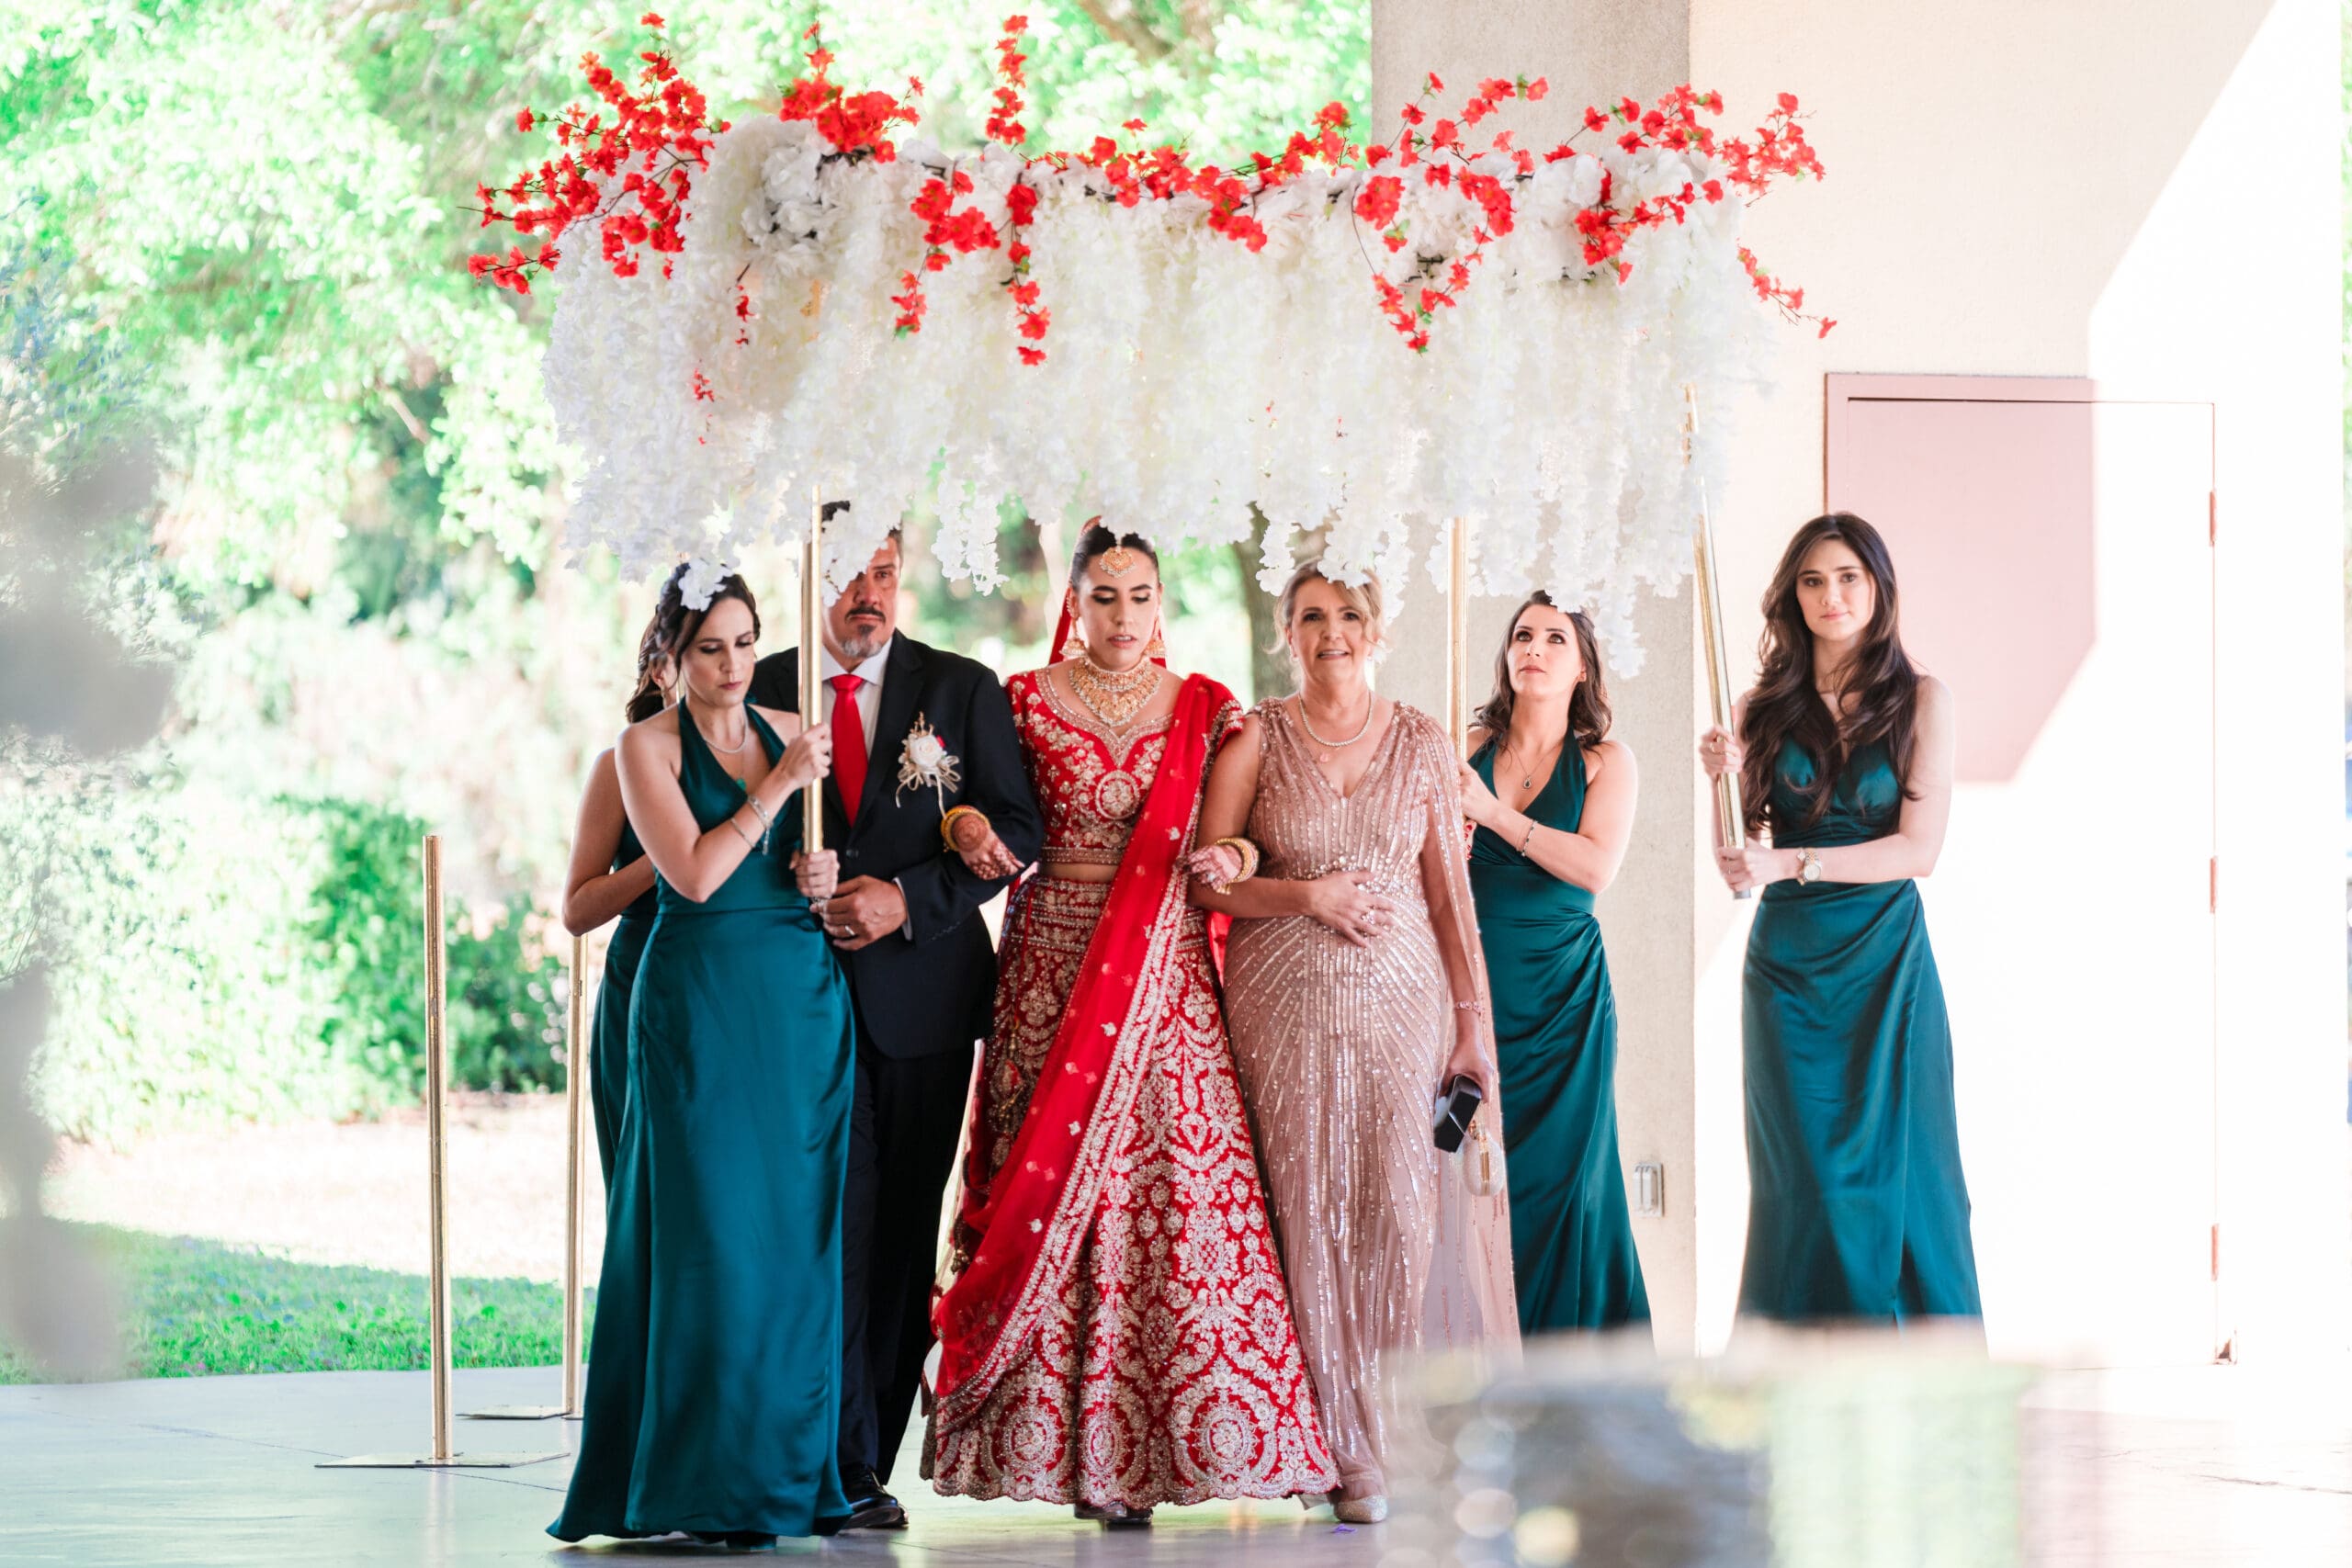 Sabrina walking with her parents and bridesmaids under a canopy of flowers at the traditional Indian wedding ceremony at Kraft Azalea Gardens